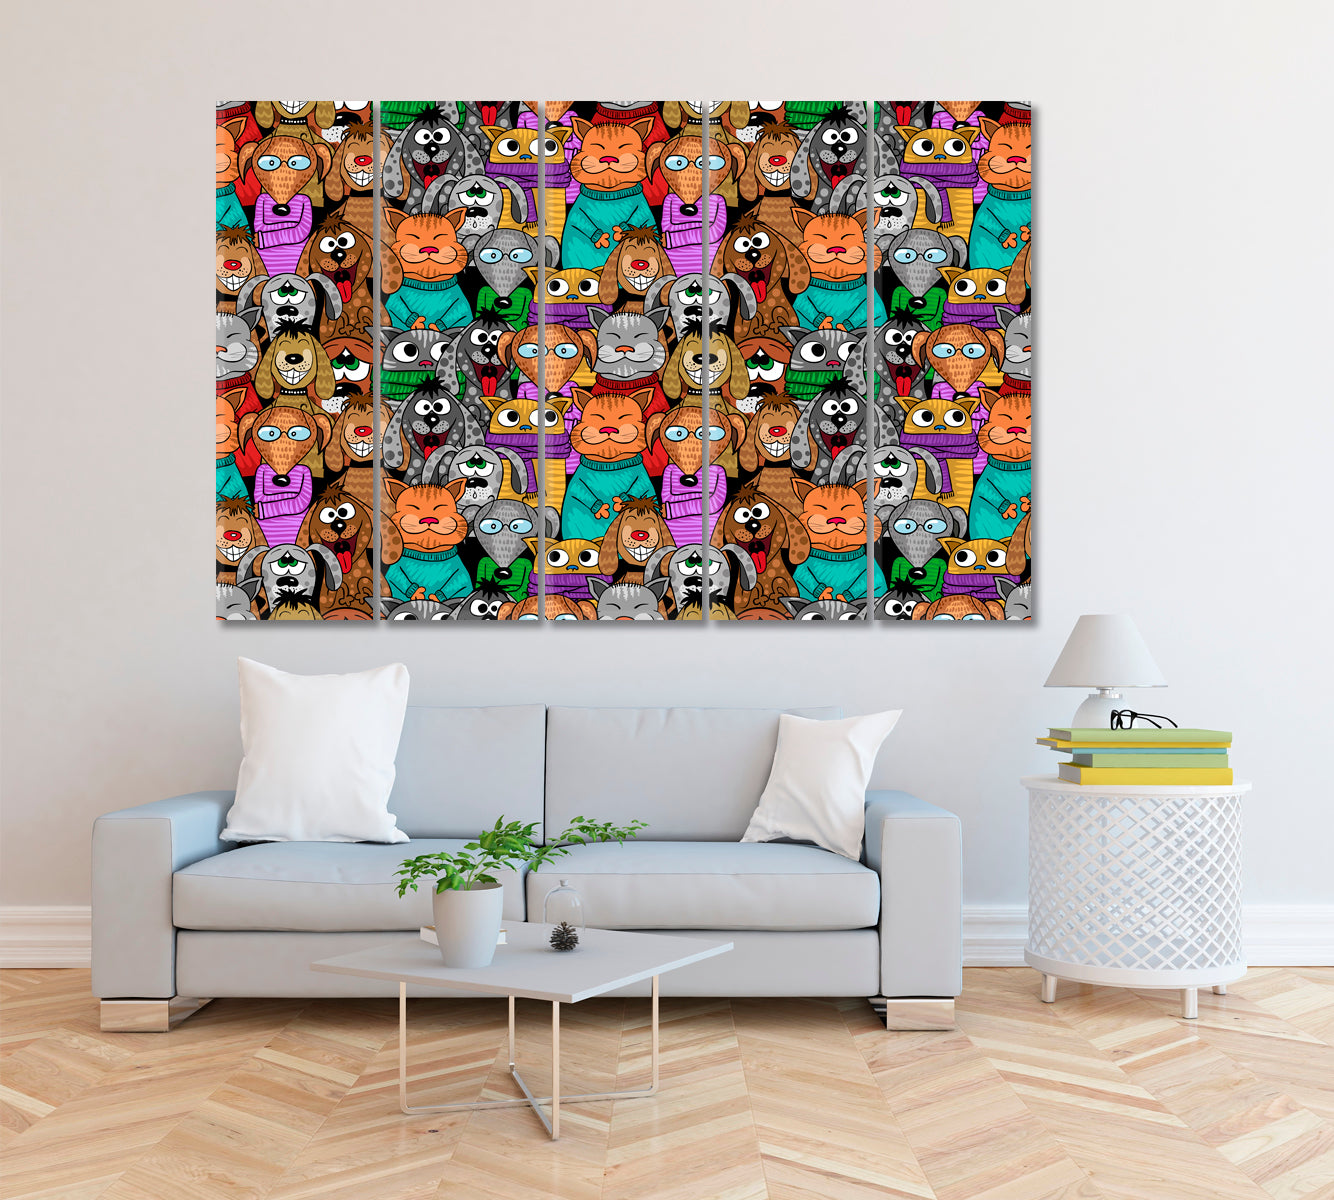 Cartoon Cats and Dogs Canvas Print ArtLexy 5 Panels 36"x24" inches 